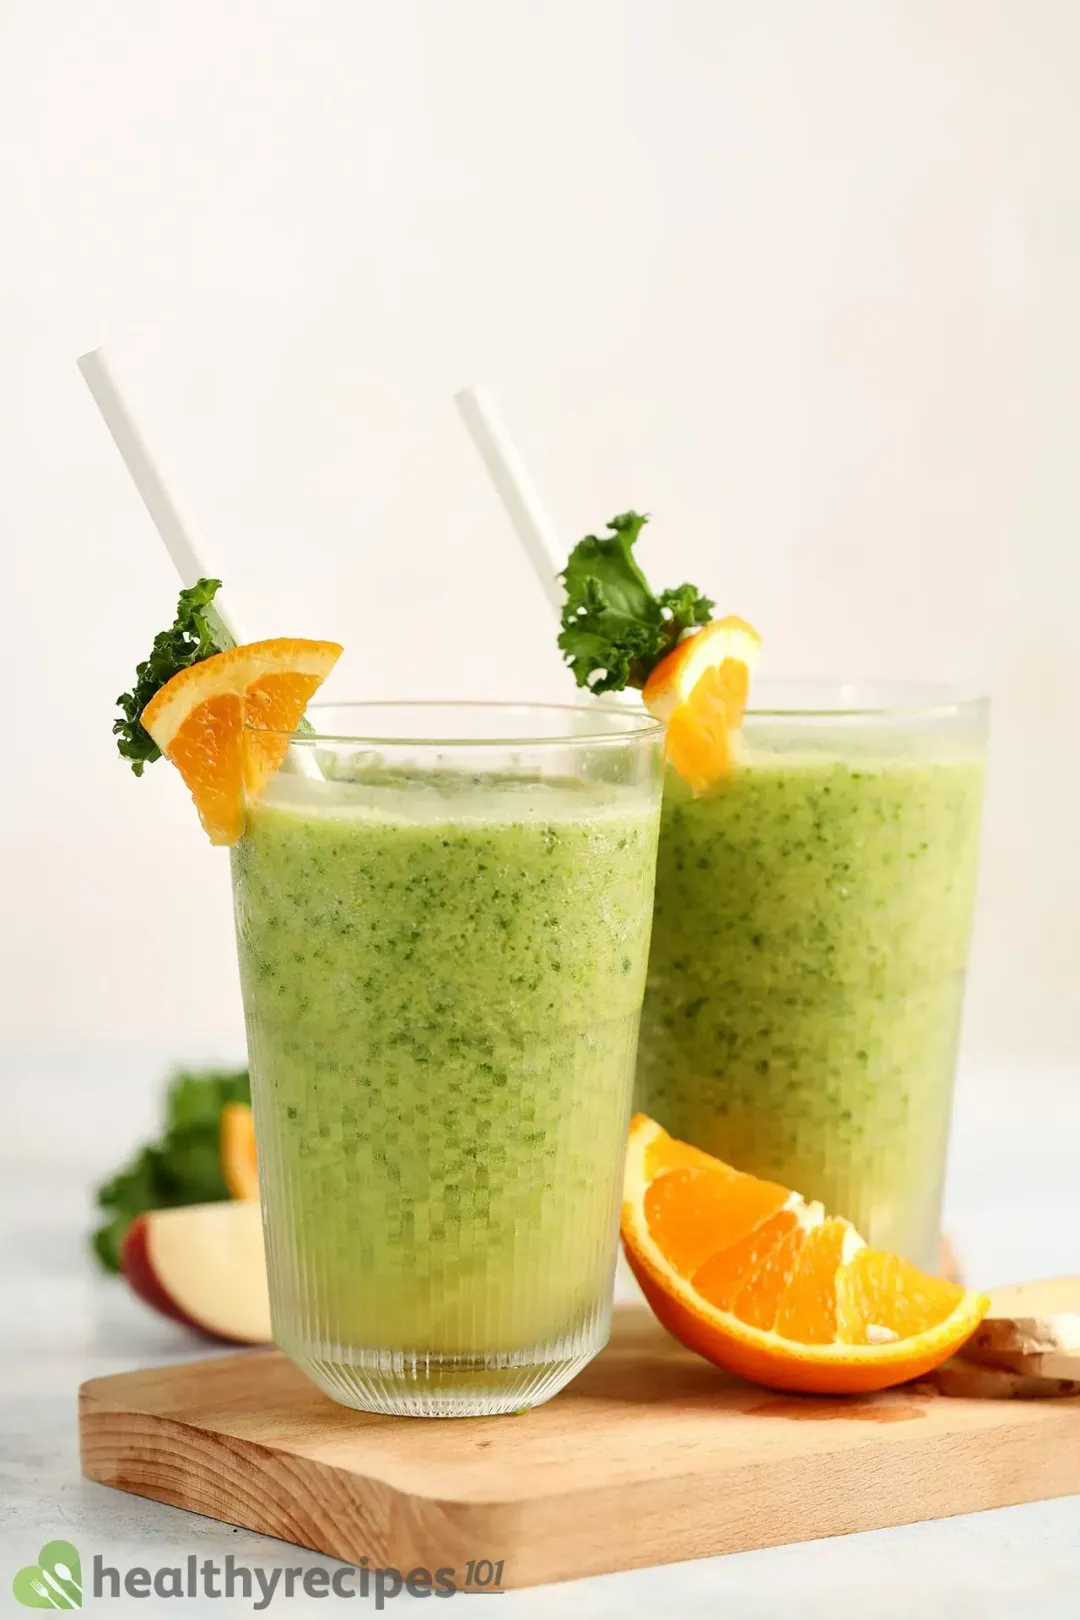 Storing and Freezing the Leftover kale apple Smoothie